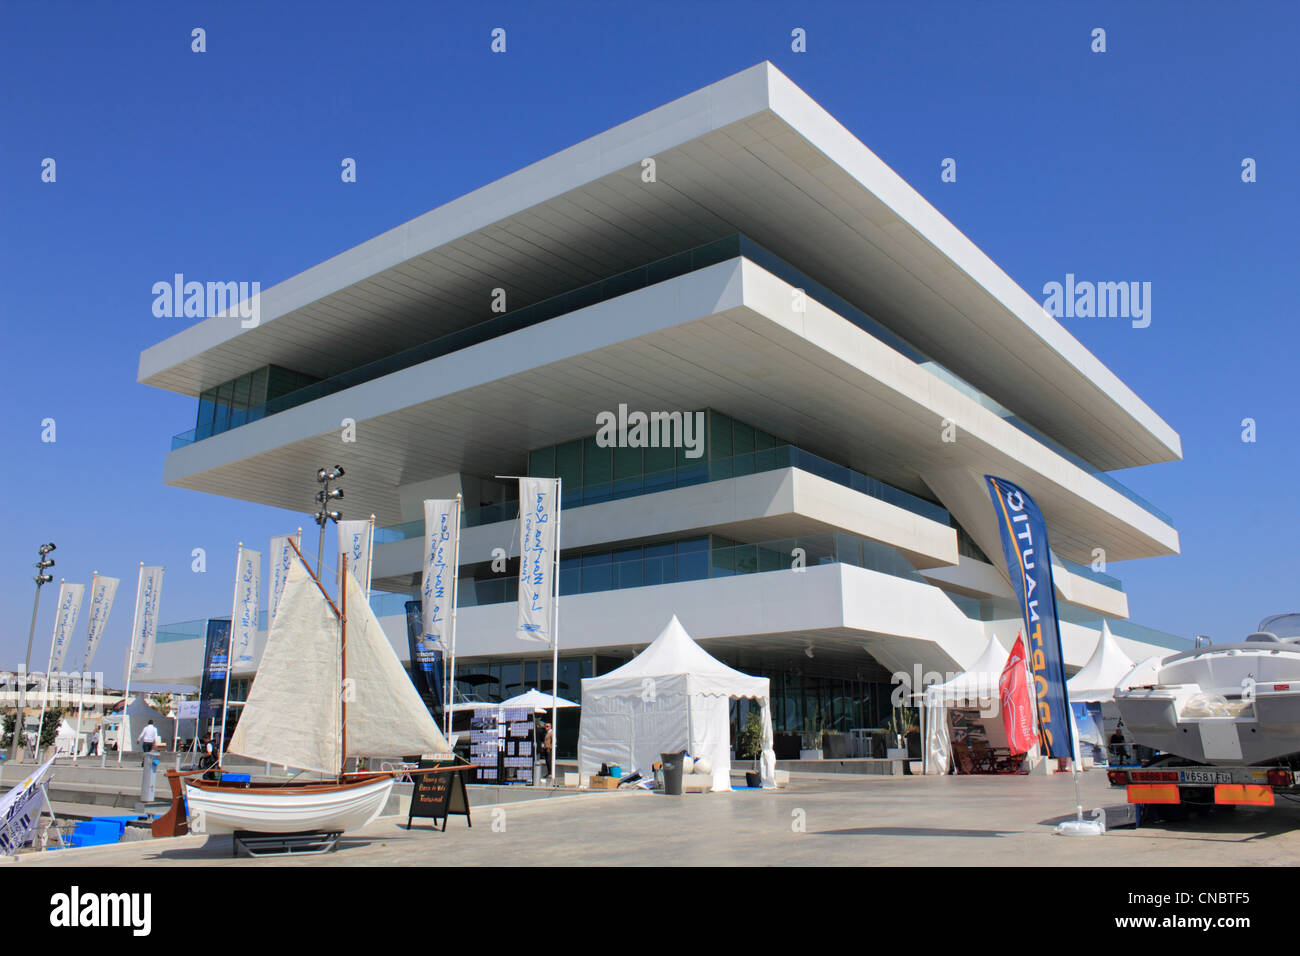 Veles e Vents (sails and winds) or America's Cup Building in The Port of Valencia Spain by David Chipperfield Architects Stock Photo